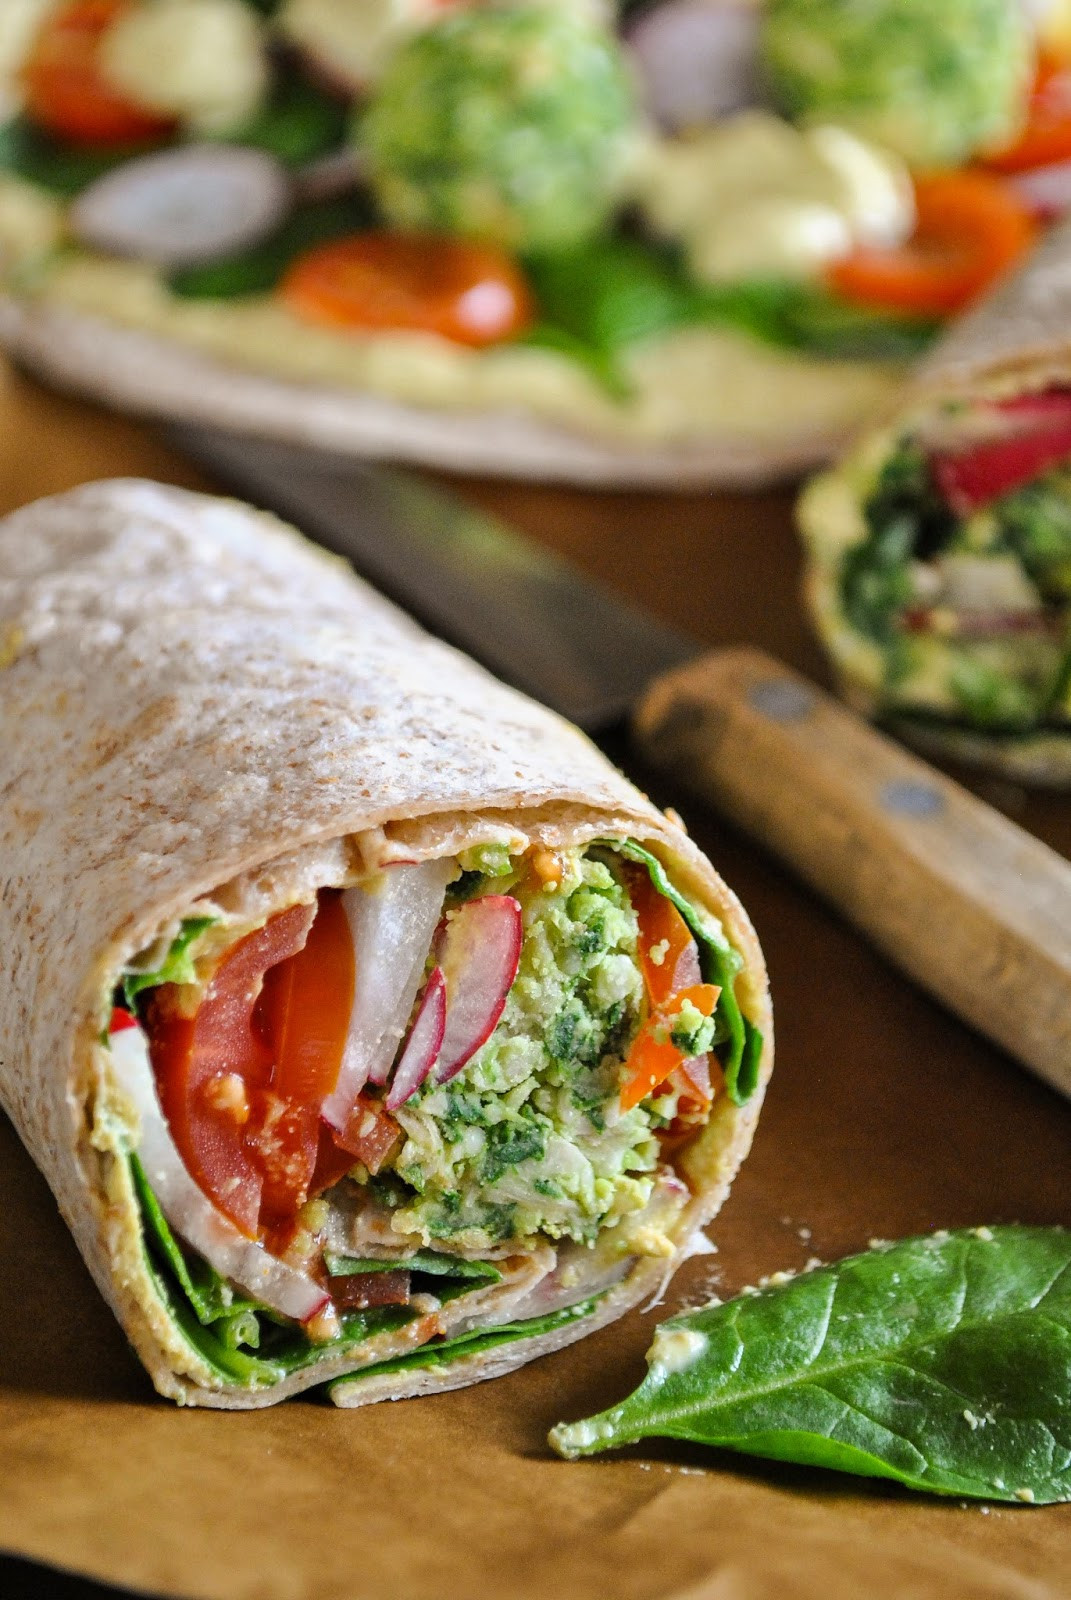 Vegan Wraps Recipes
 Vegan wraps with baked spinach balls and lemony dressing